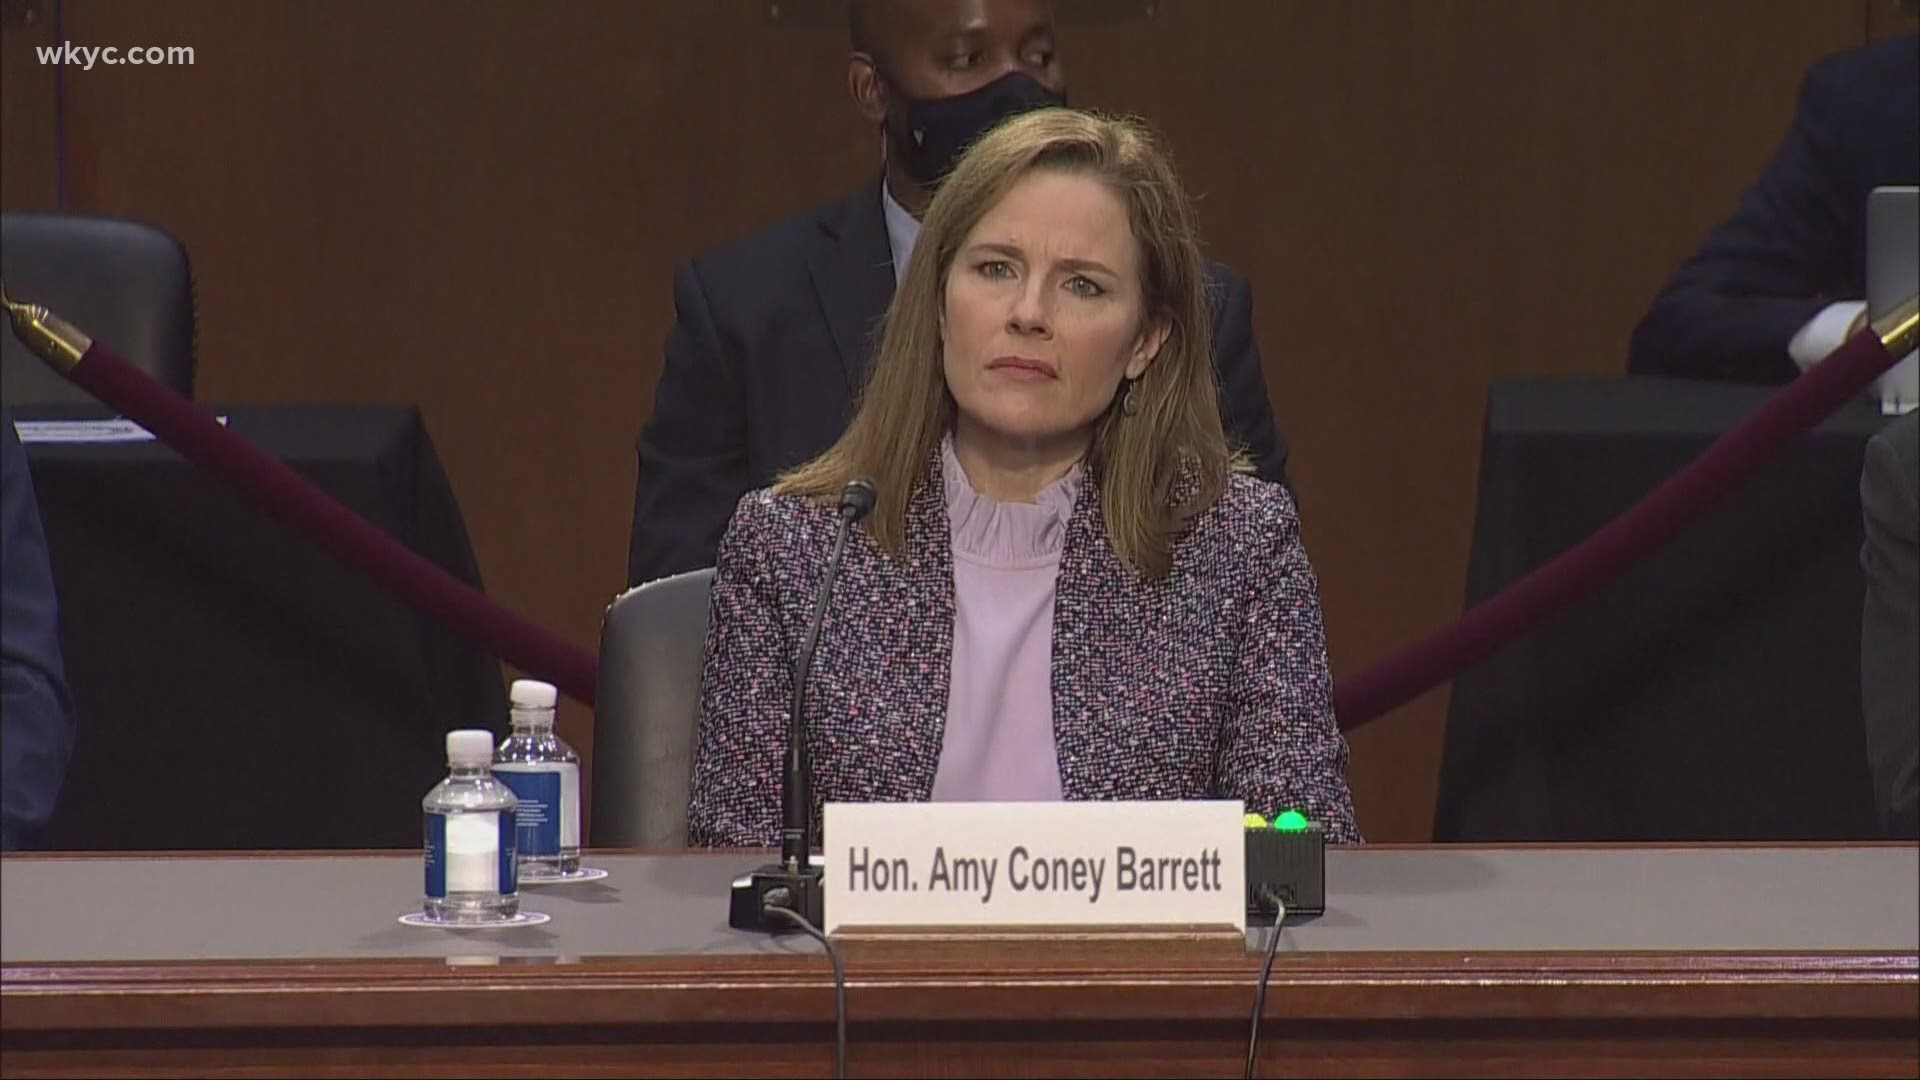 Amy Coney Barrett went through a final round of questioning today before the Senate Judiciary Committee.  She vowed to keep an open mind on all cases.